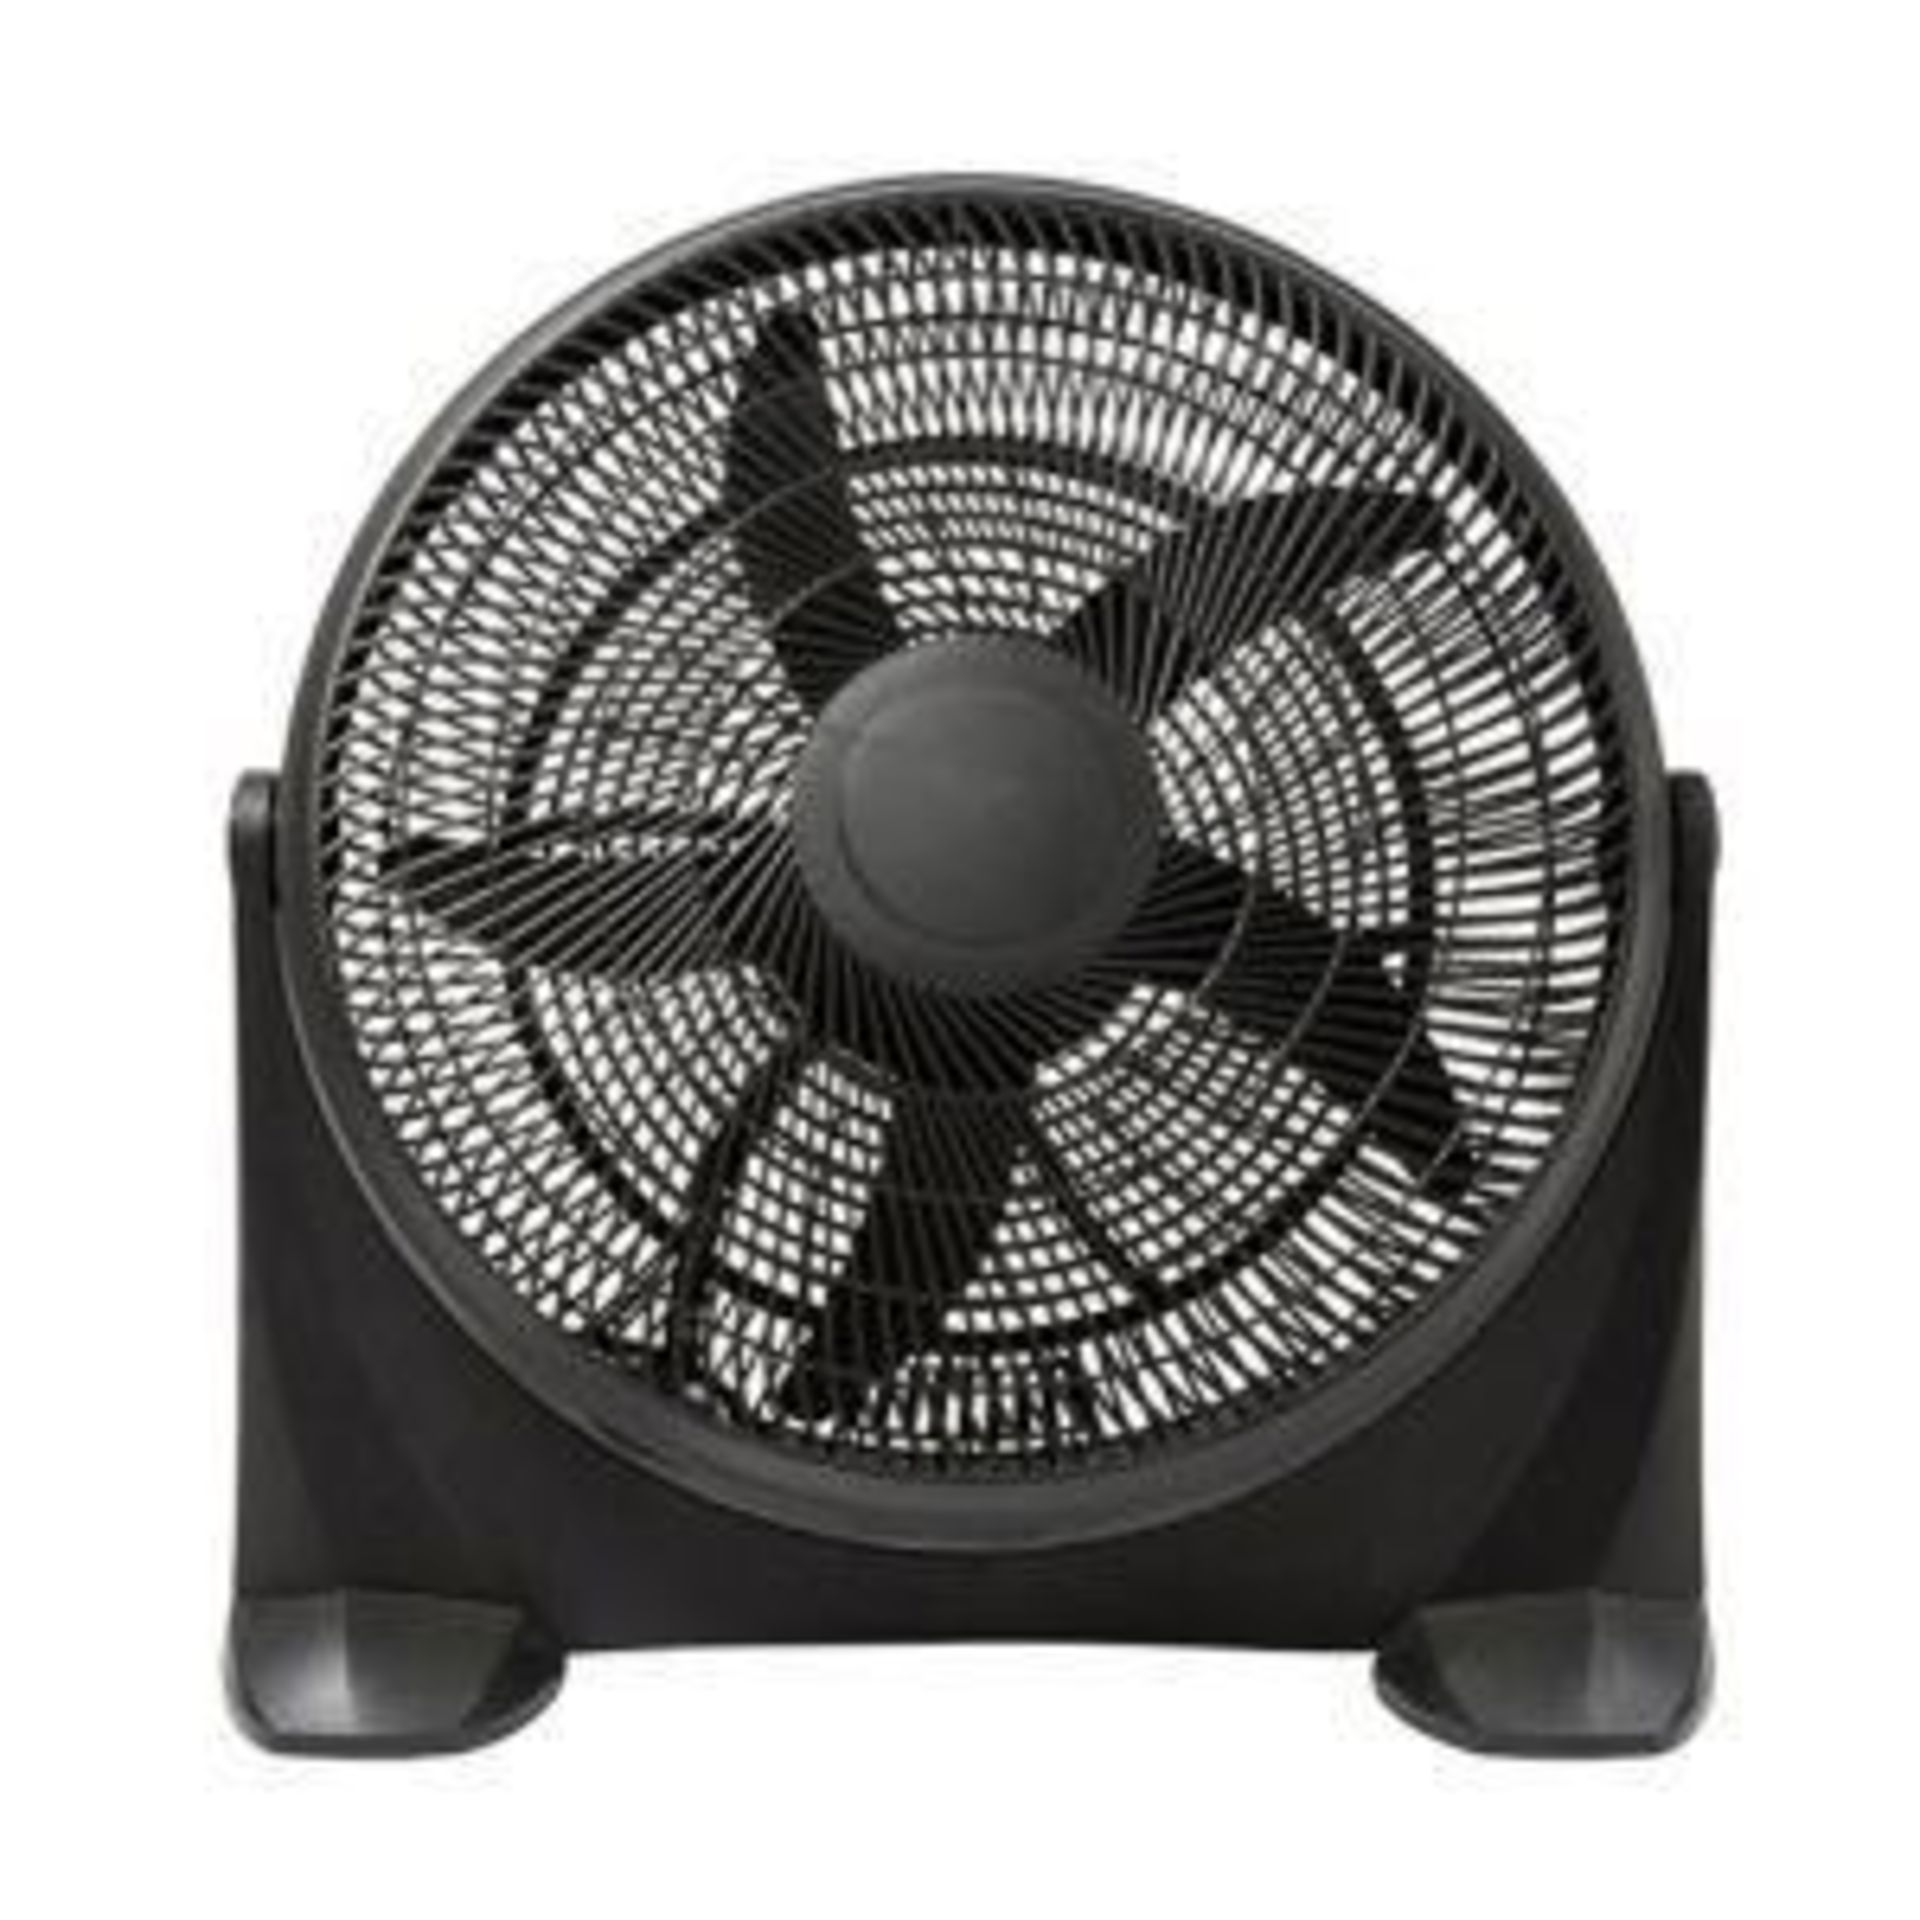 2 x Large 20" Box Fan, Black. - RRP £96 (LOCATION - H/S R 5.2) This floor fan will provide